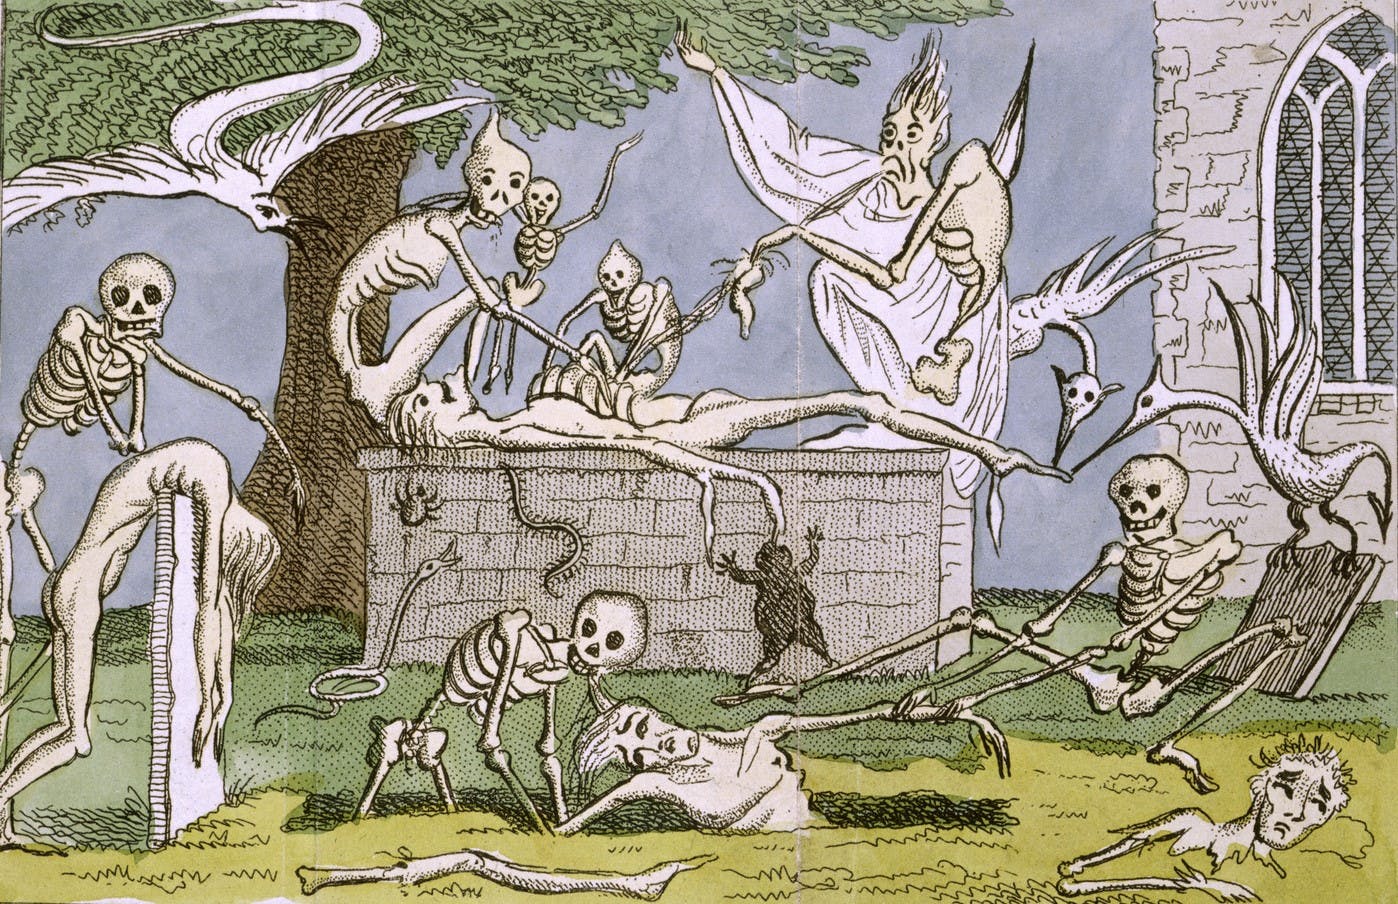 A color drawing of various skeletal specters, gallivanting around a vault tomb in front of a medieval church. They seem to be pulling at the bodies of two dead people: one on top of the tomb and another in a grave in front of it. Ghoulish!